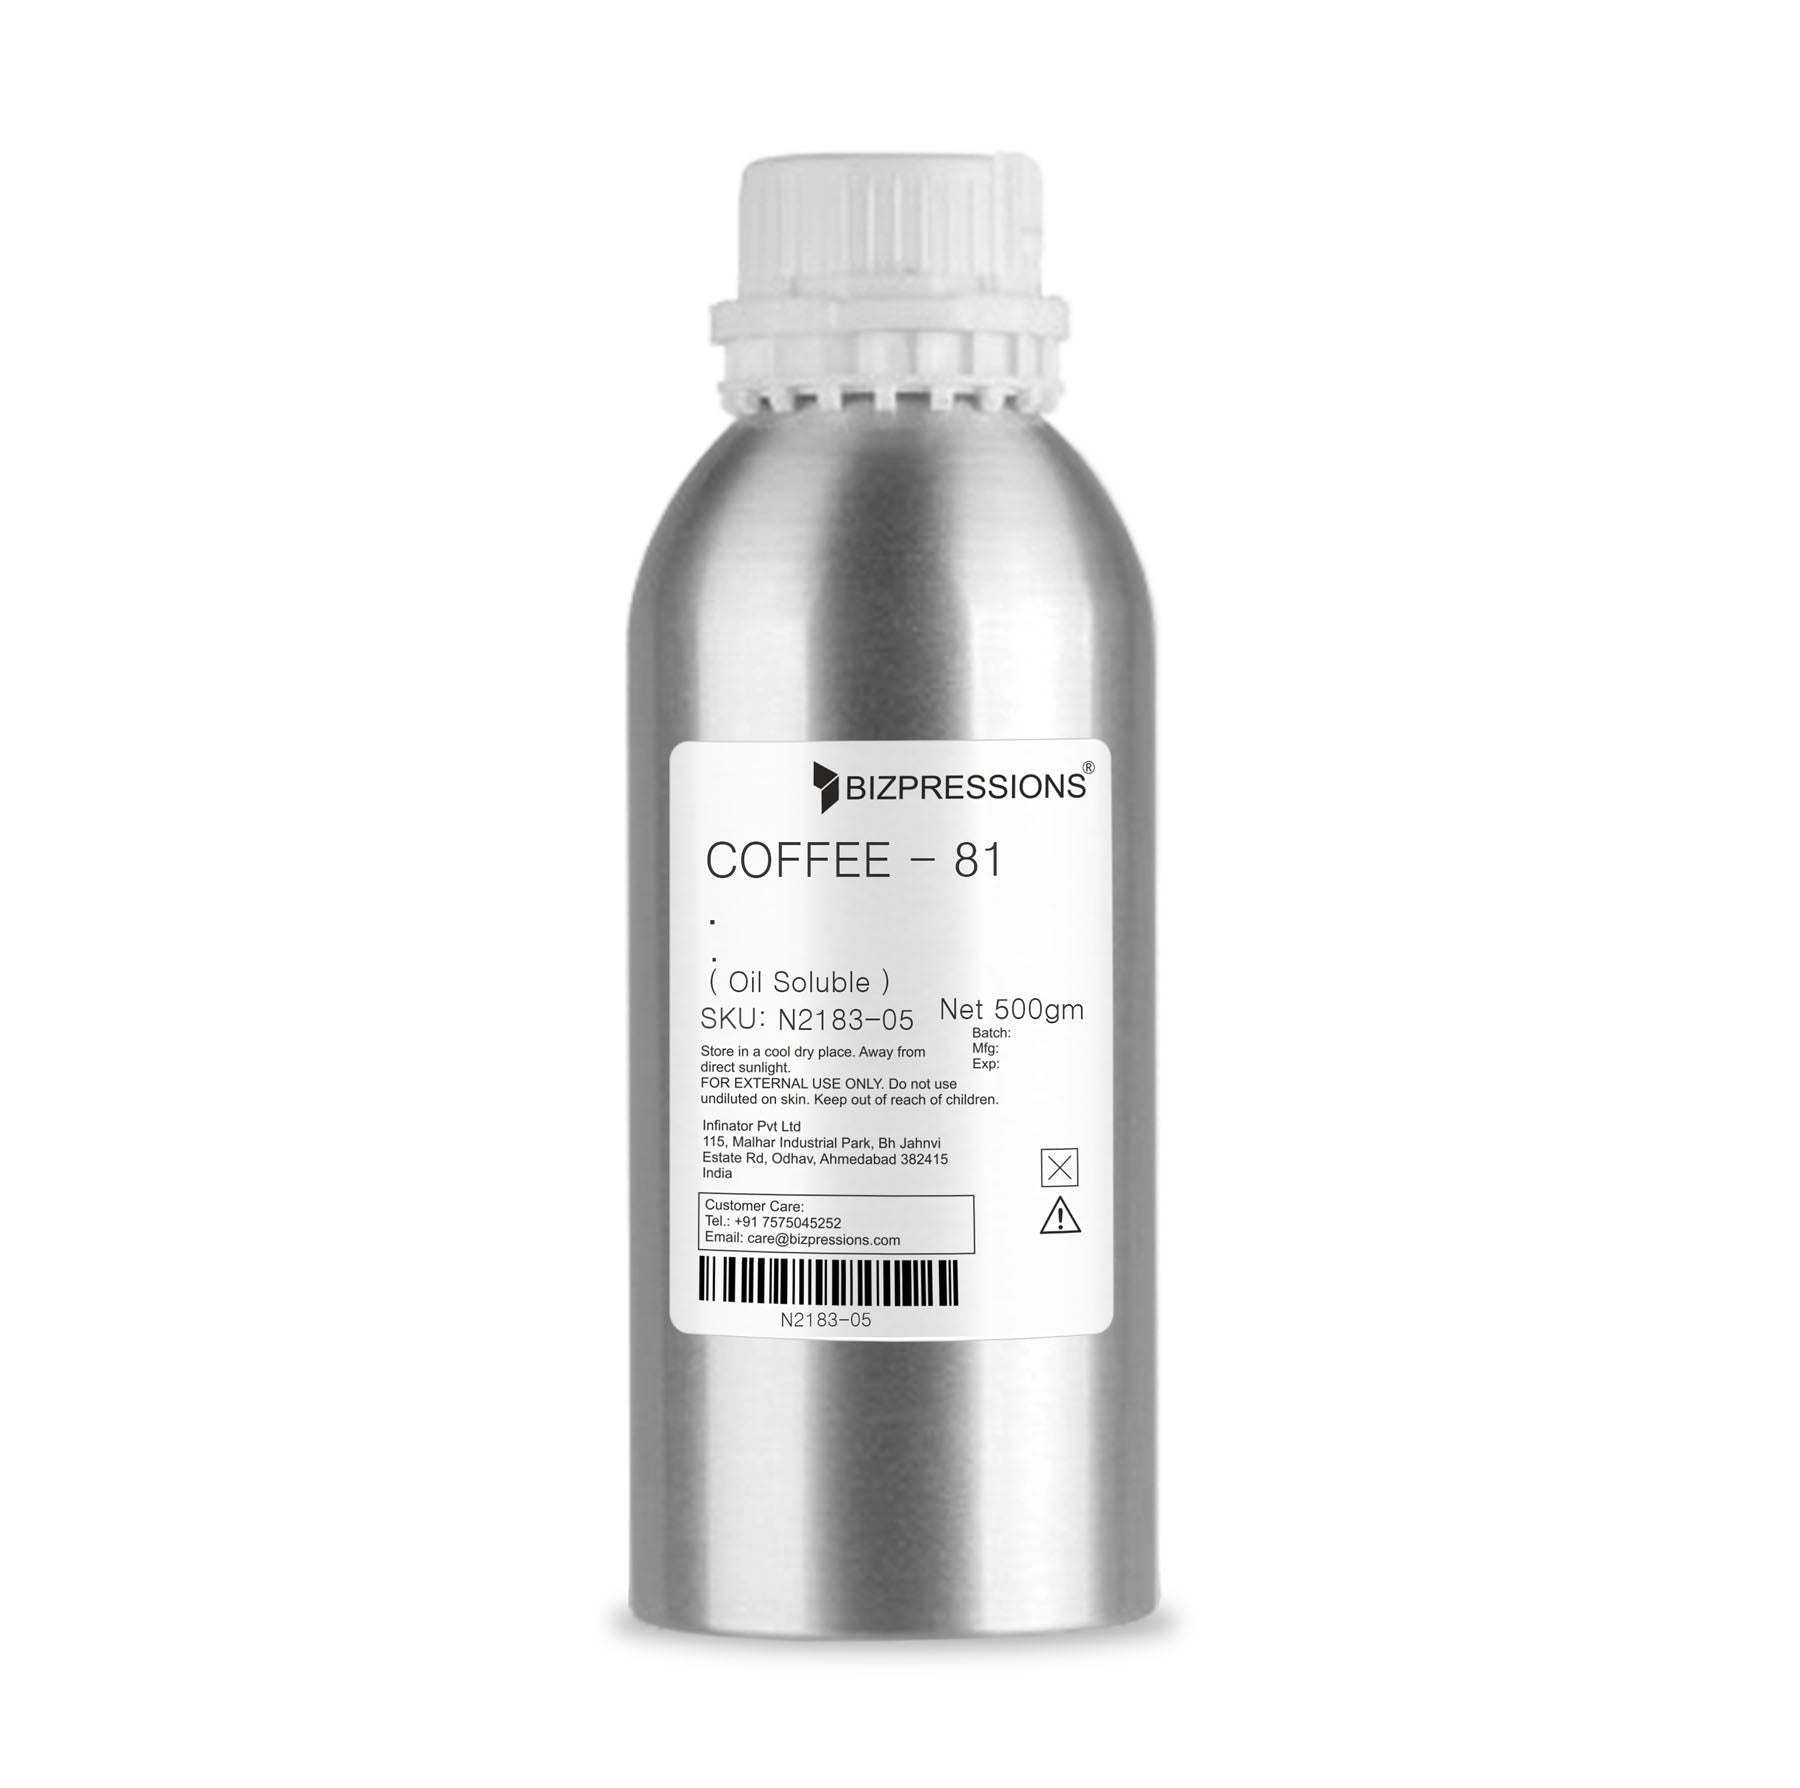 COFFEE - 81 - Fragrance ( Oil Soluble ) - 500 gm